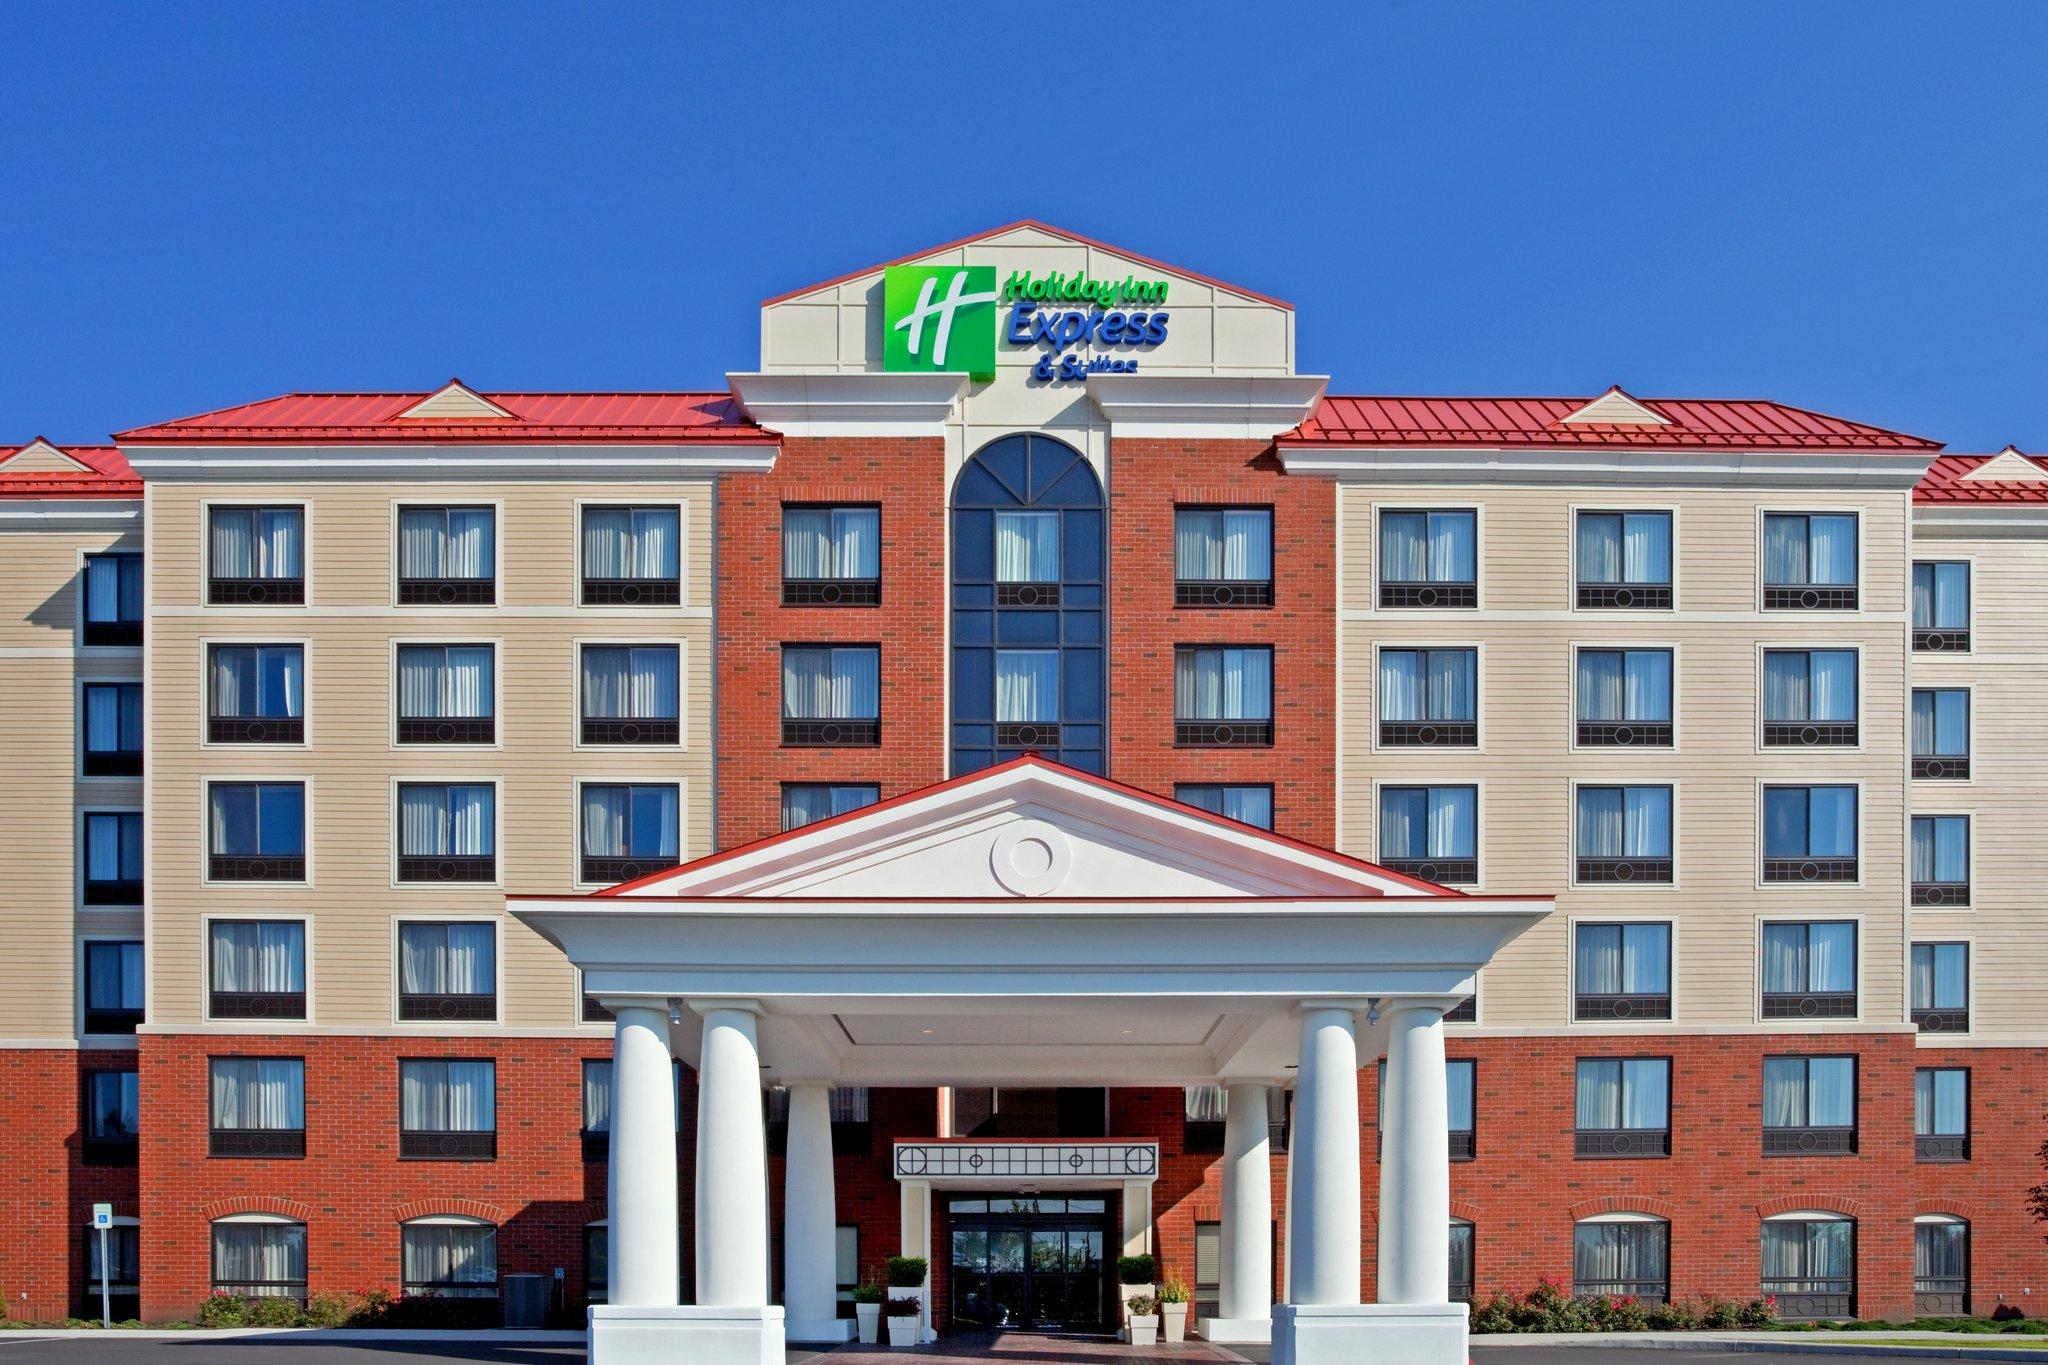 Holiday Inn Express & Suites Albany Aiport Area-Latham in Glen Falls, NY